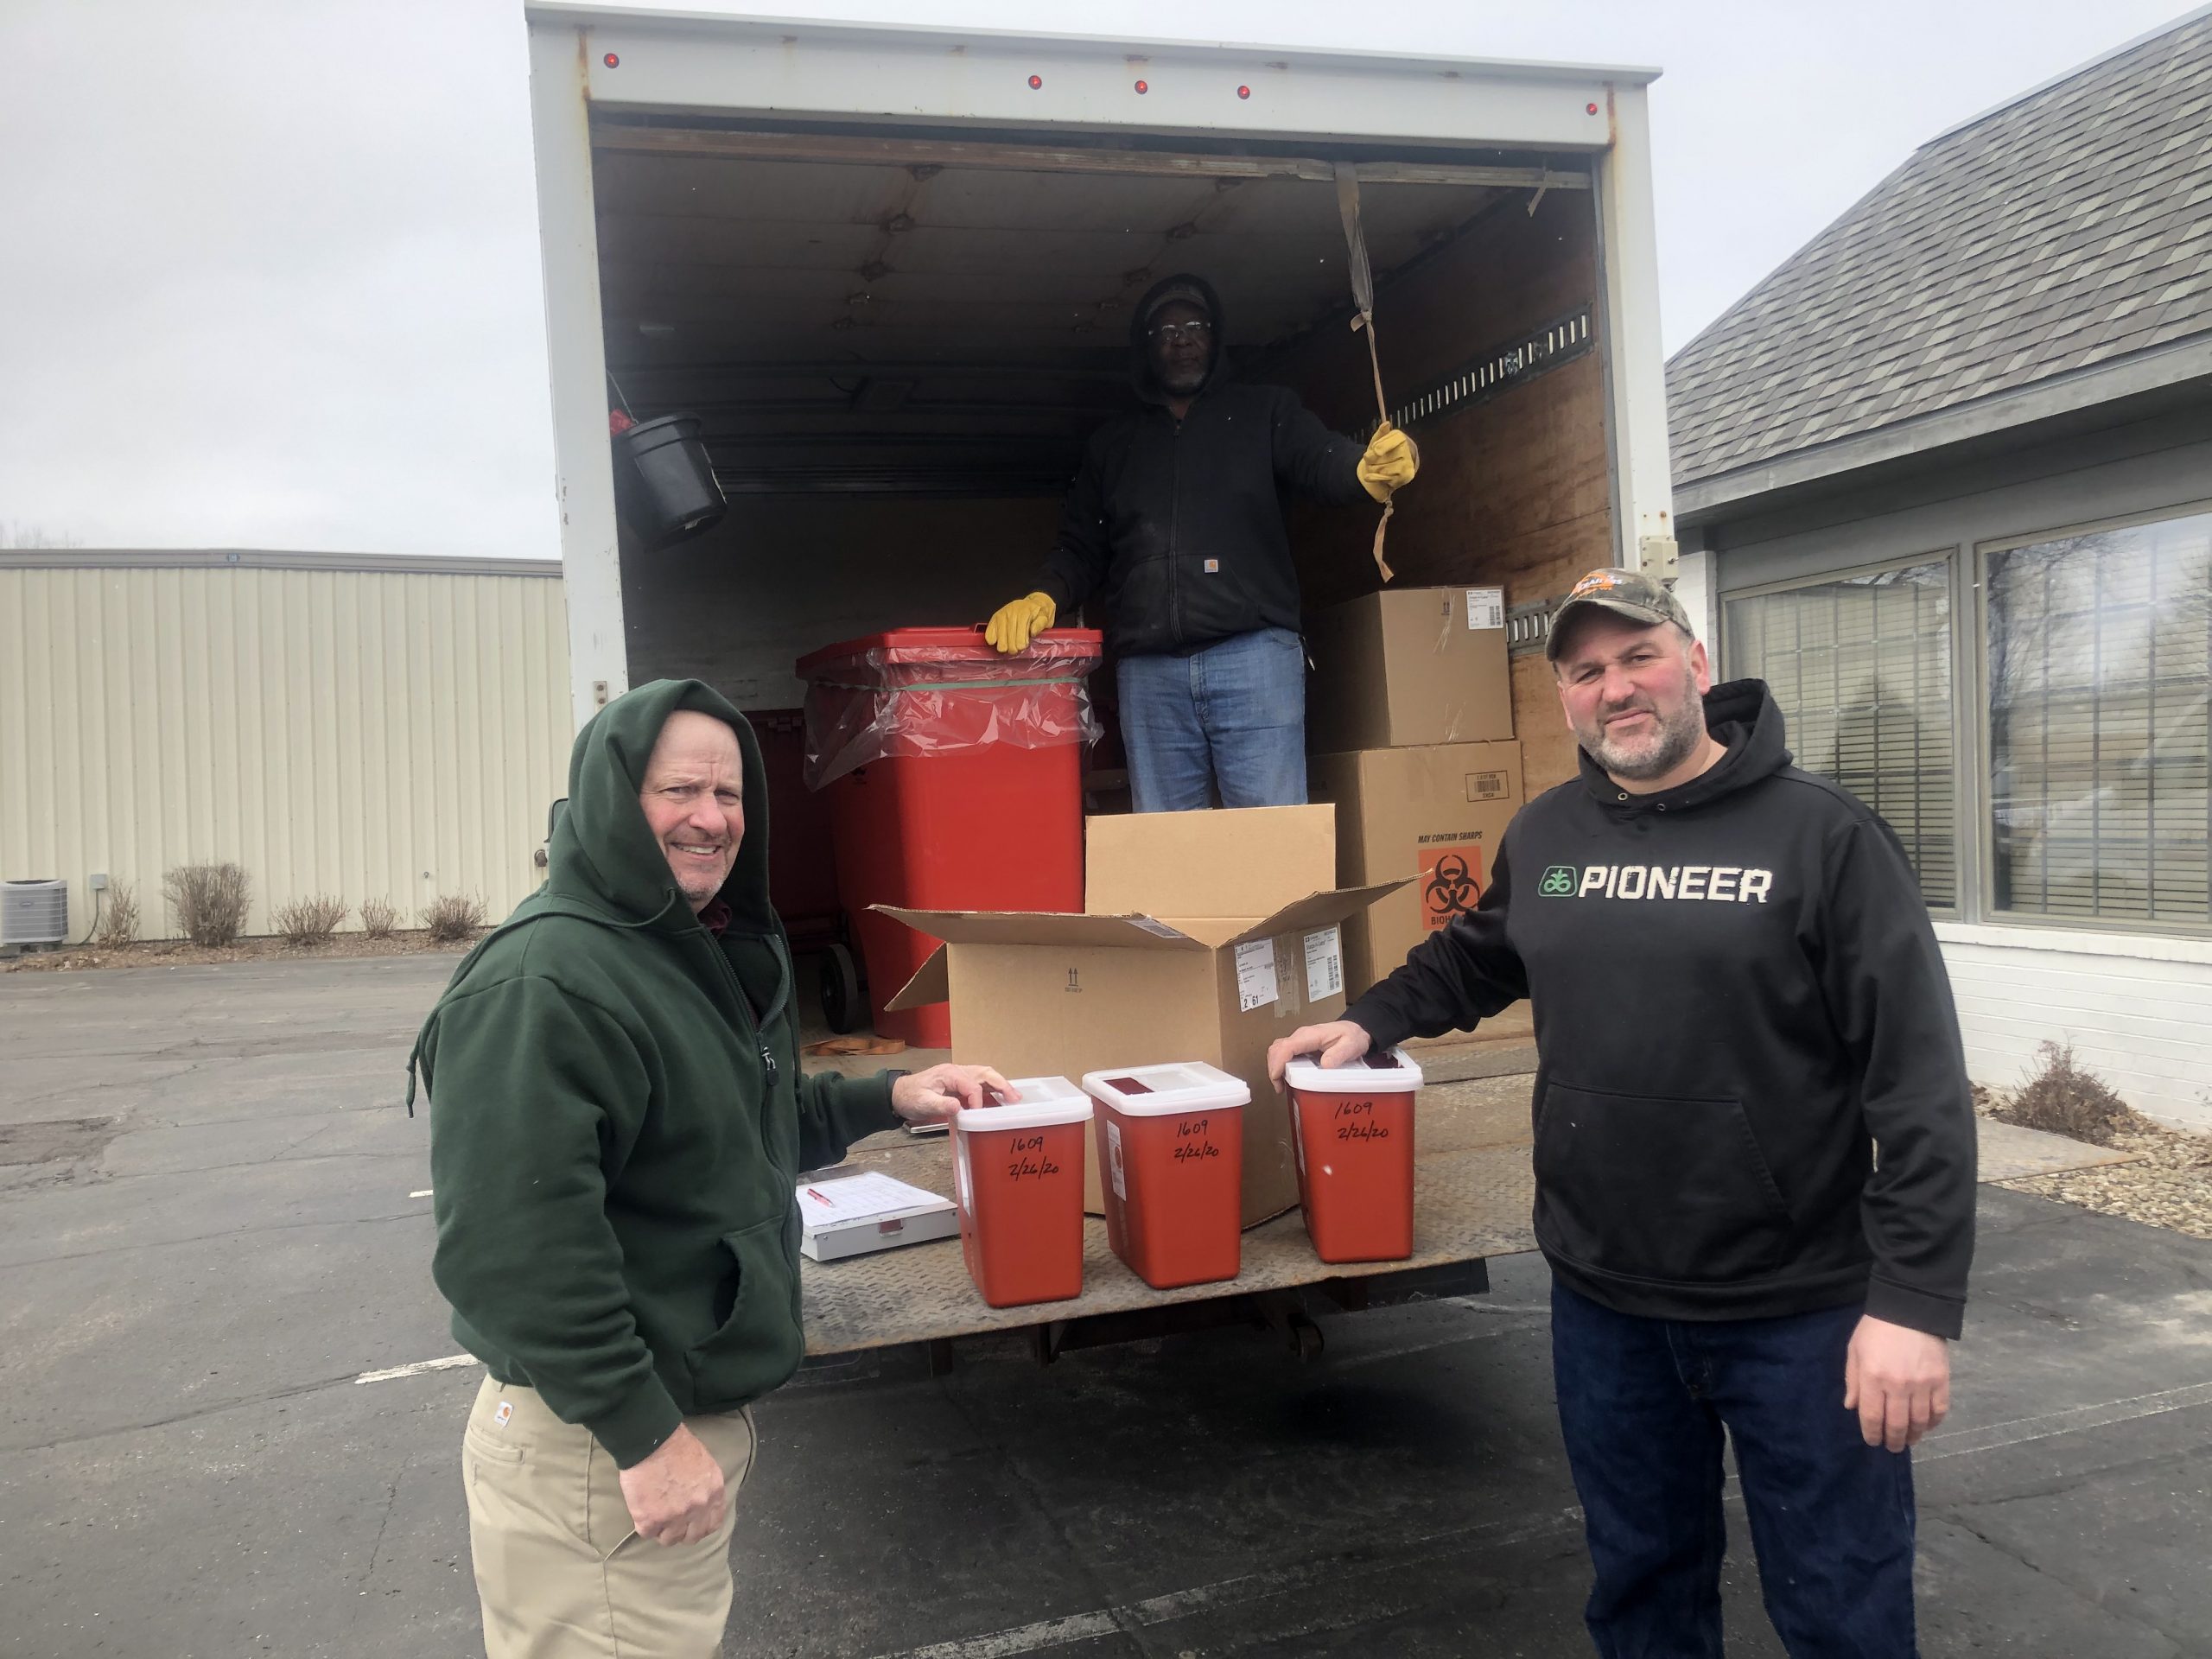 Top: MERI's Tyrone McGee is on hand as Grande's Randy Hardyman (left) hands producer Hardy Ripp a biohazard container as part of the sharps collection event held recently in Waunakee